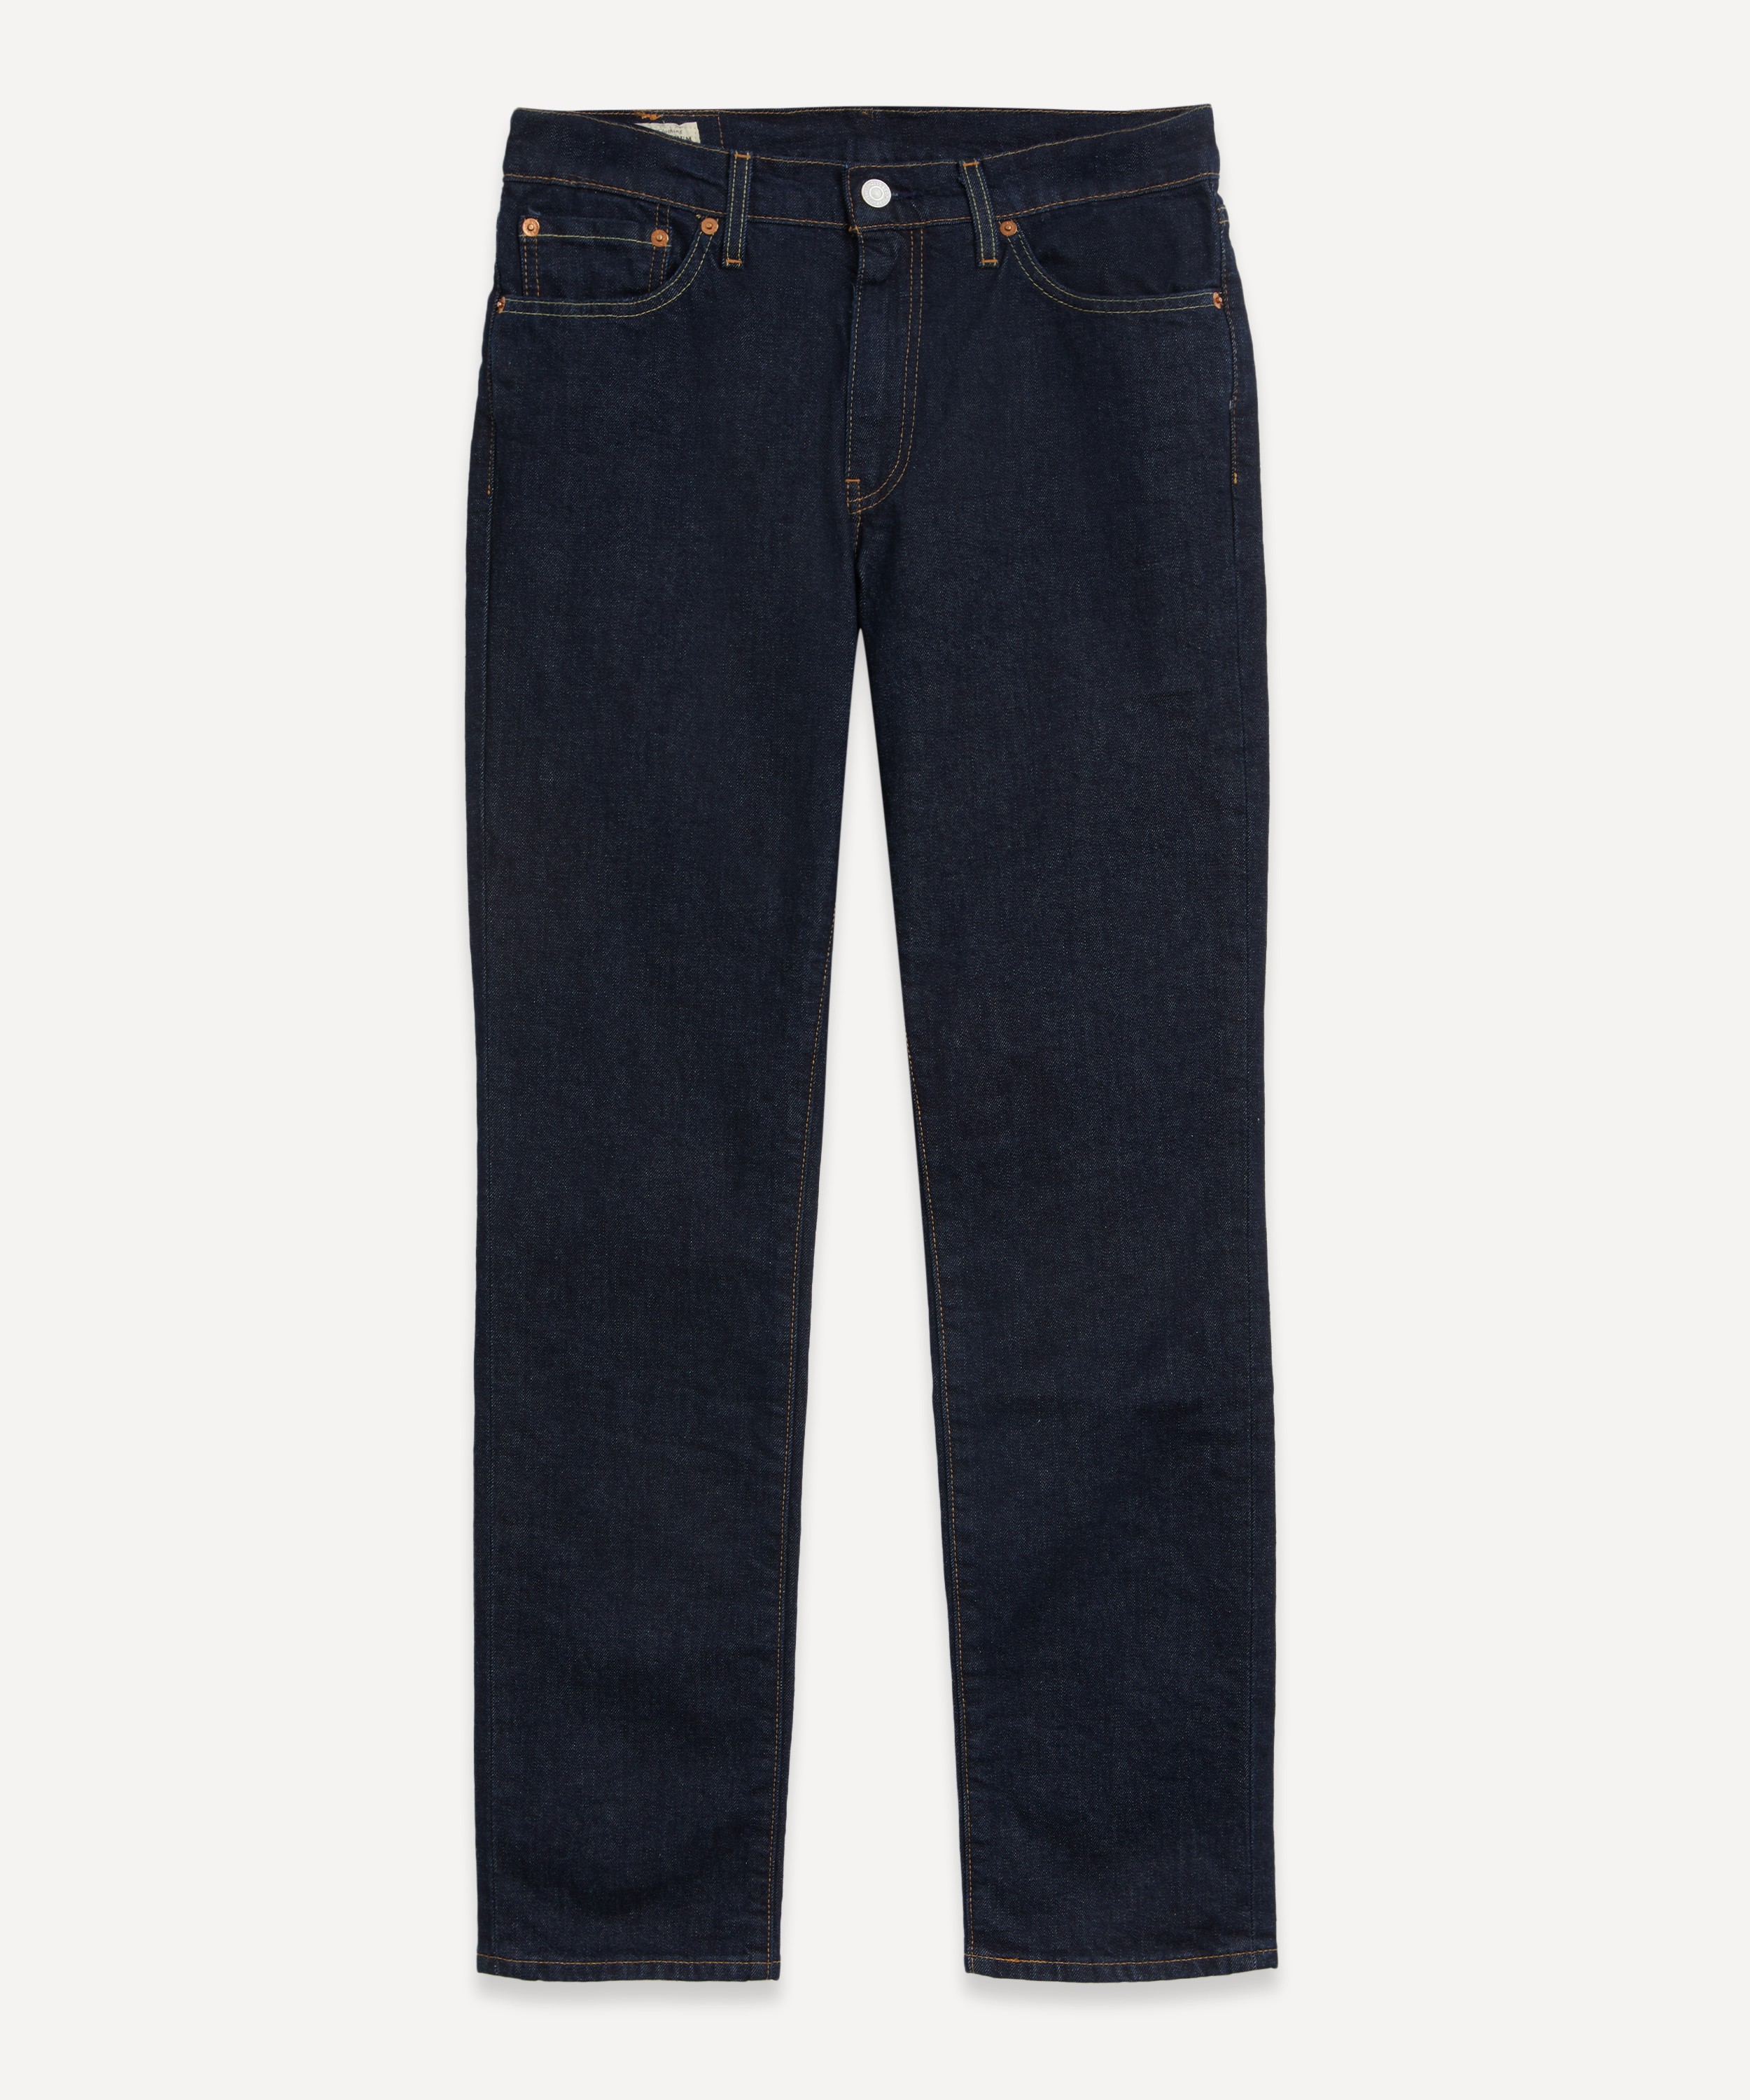 Levi's Made & Crafted - 511 Slim Rock Cod Jeans image number 0